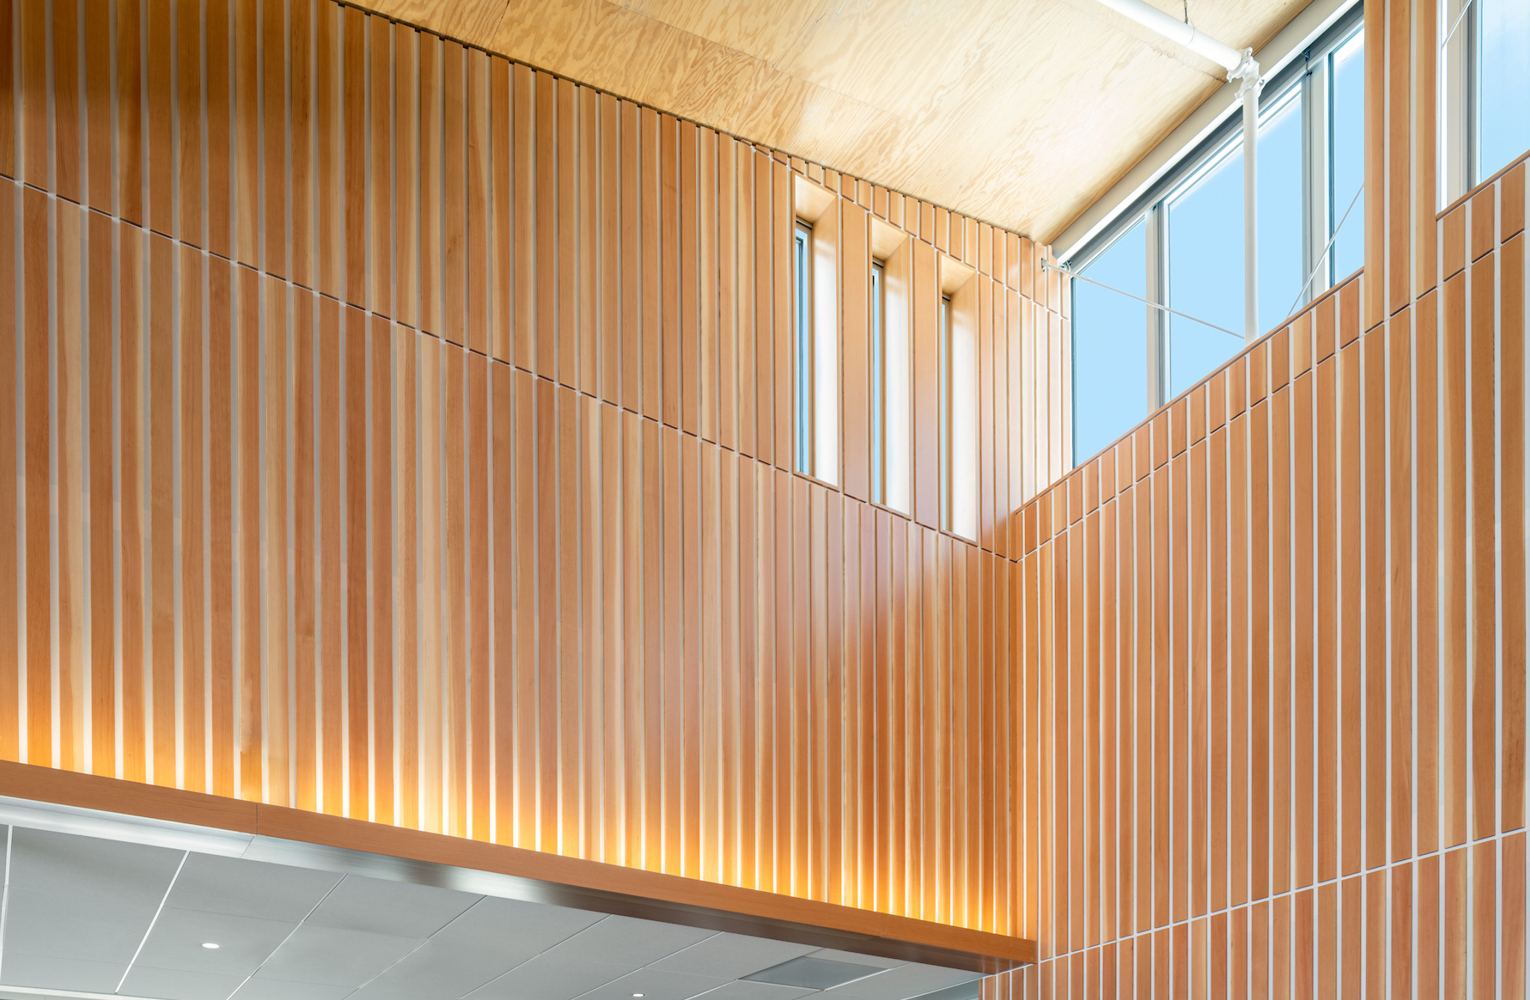 Exposed mass timber construction detail from the corner of a high wall. Light is streaming in and reflecting warmth in the wood.